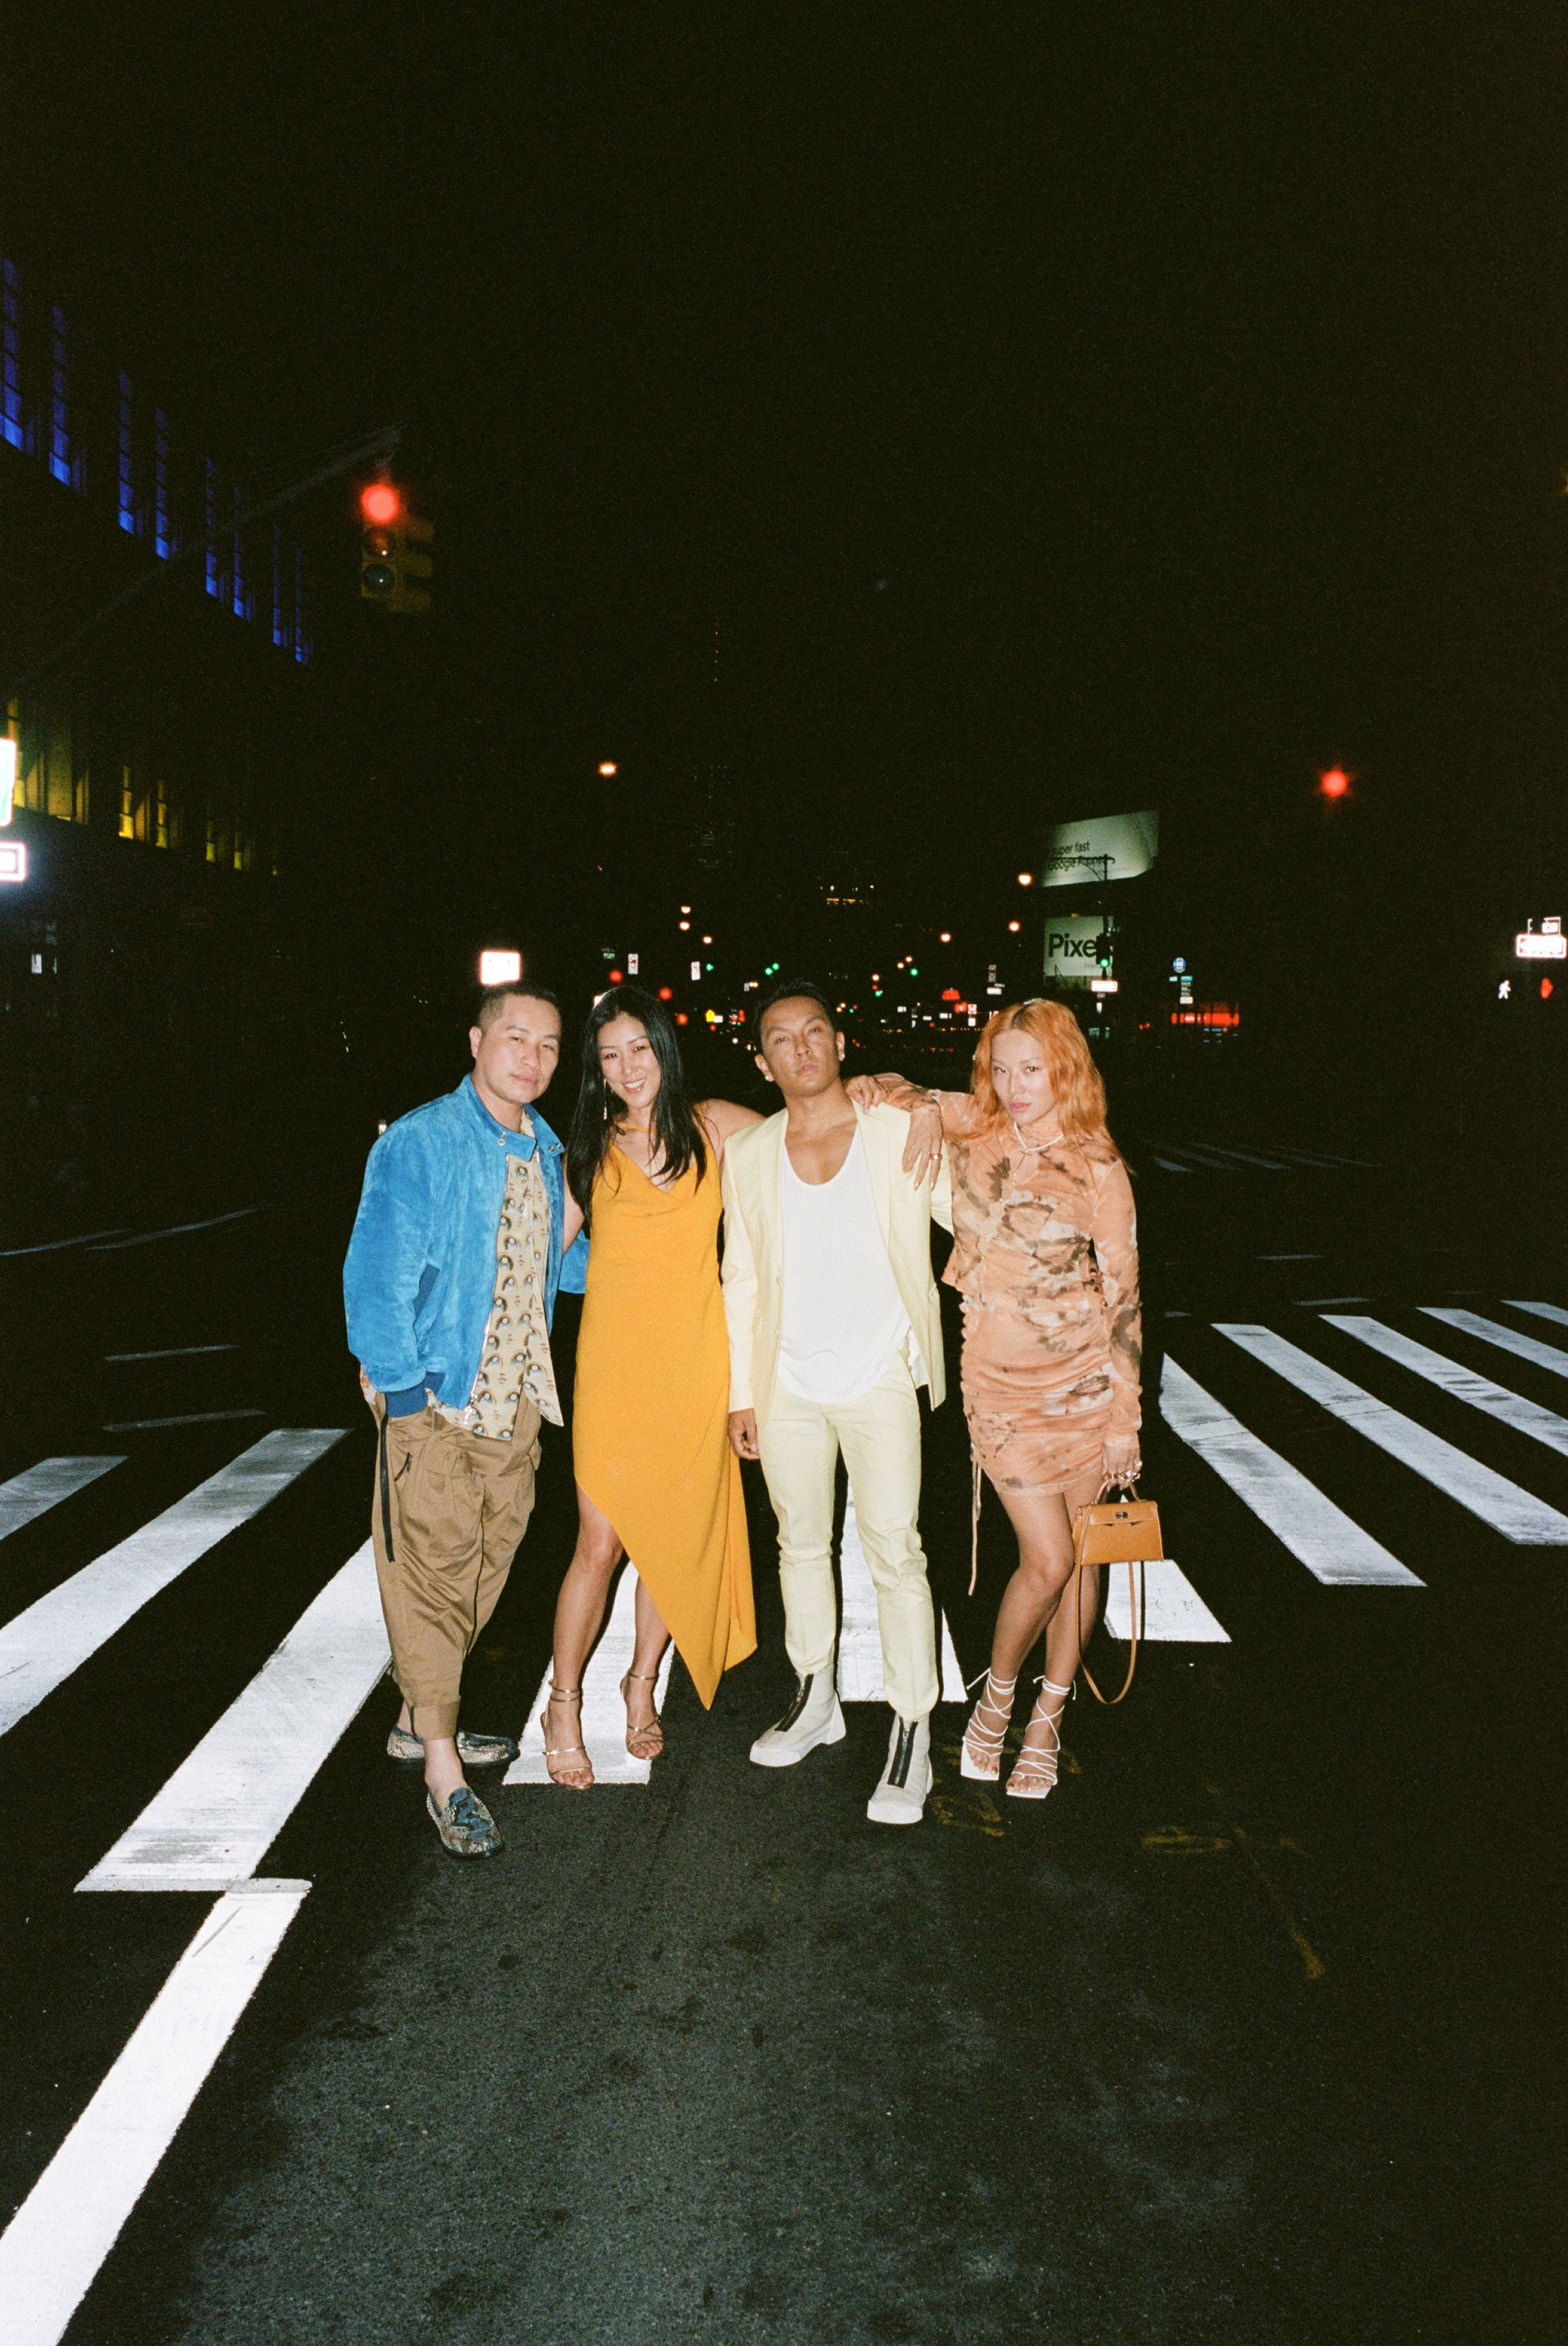 Meet the 5 'Slaysians' taking on the fashion world: from Bling Empire